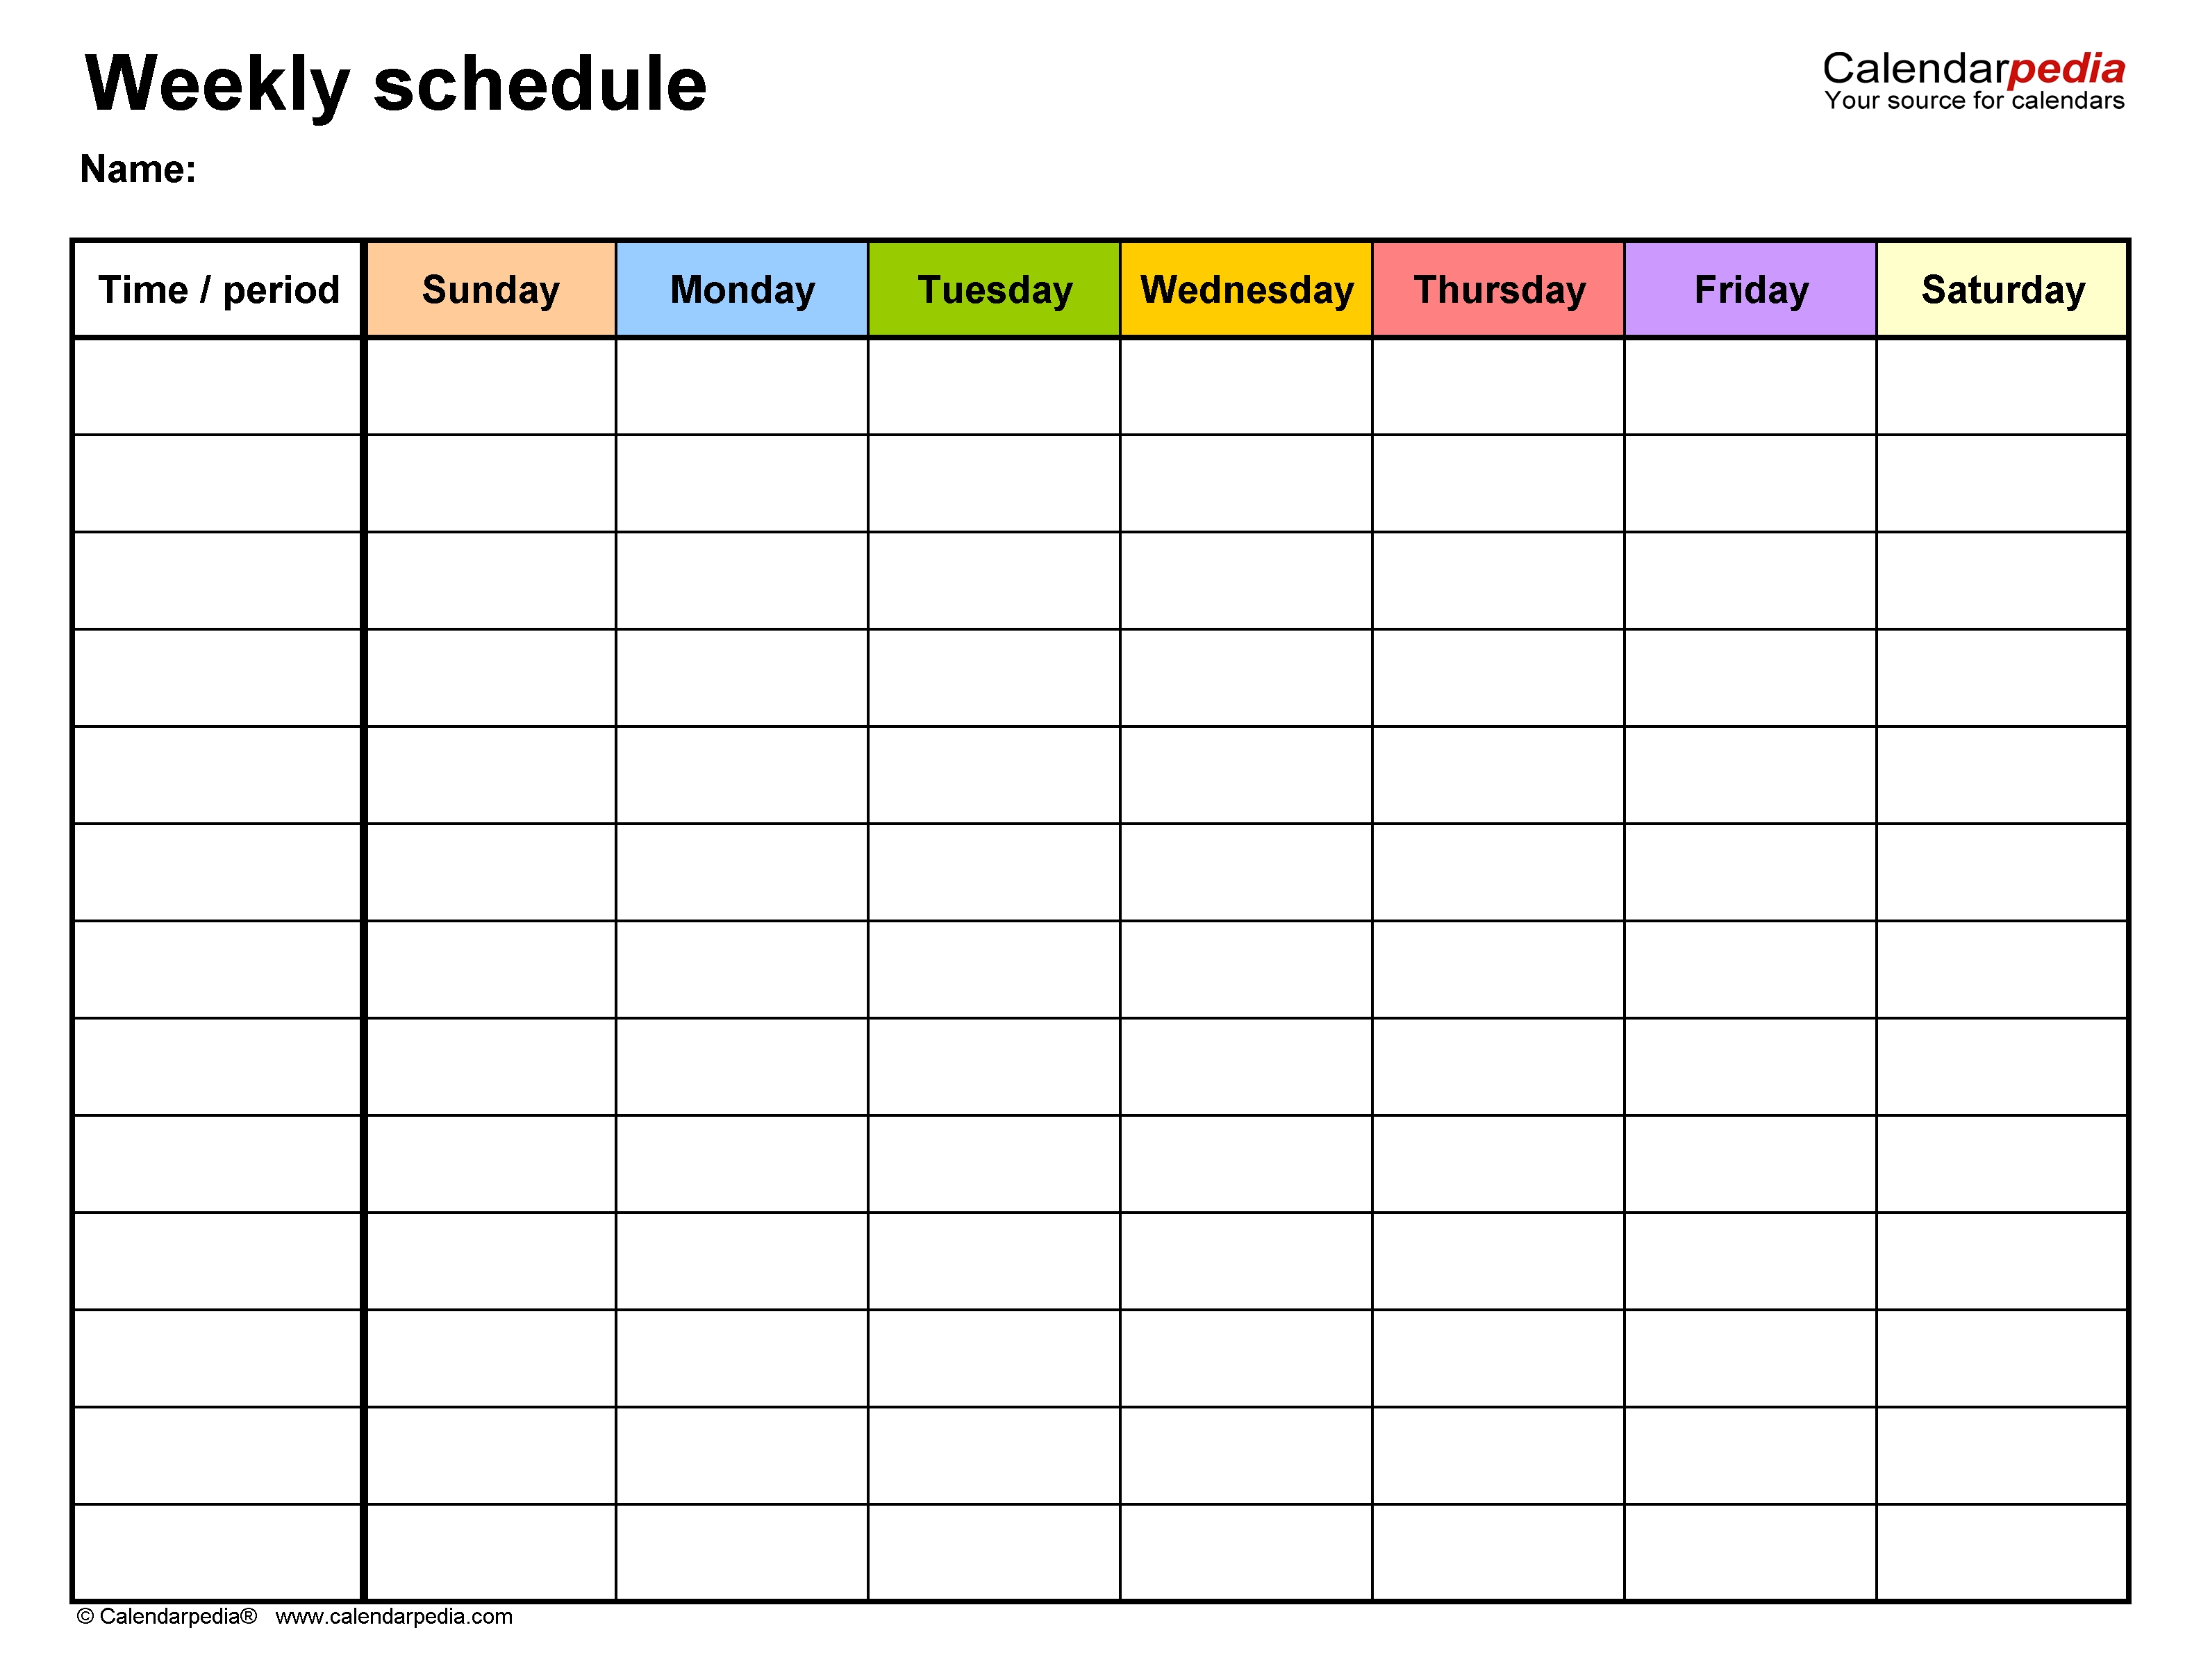 Free Weekly Schedule Templates For Excel - 18 Templates 7 Day Event Calendar Template